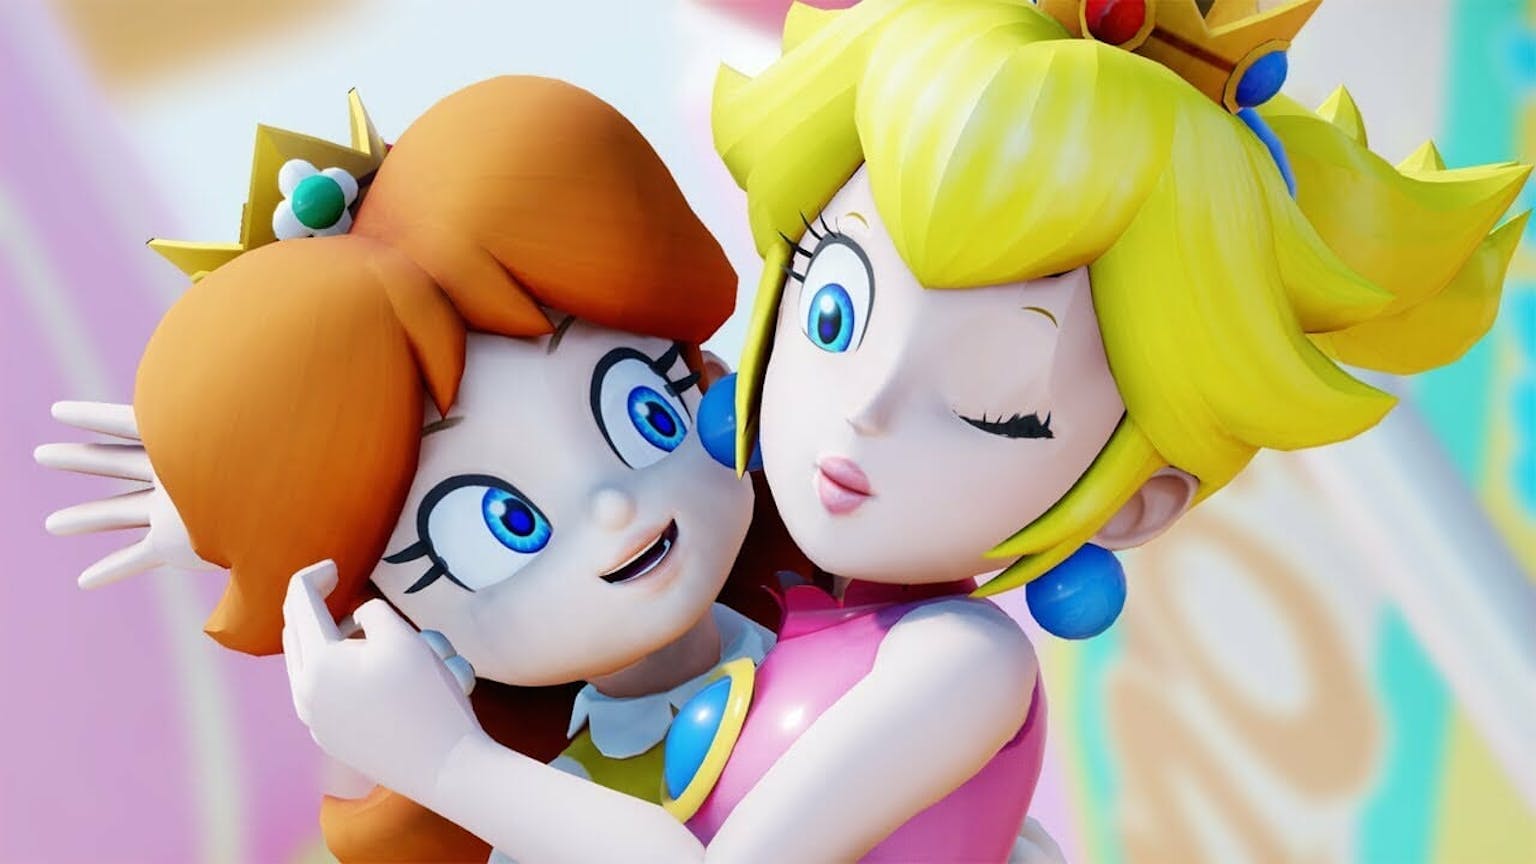 This Twitter Account Shows Princess Peach And Princess Daisy Dancing To 6981